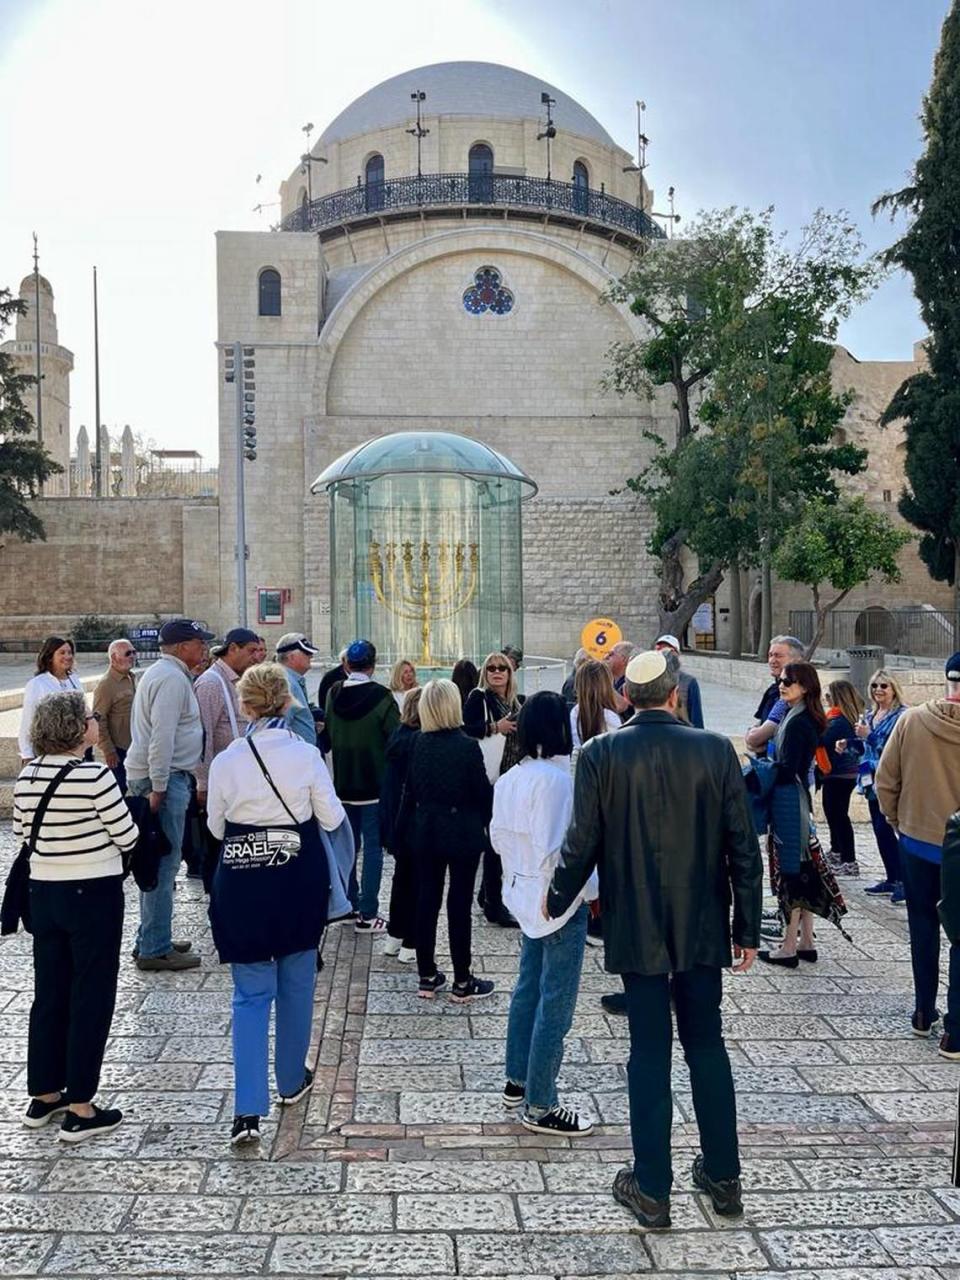 Before arriving at the Kotel or Western Wall on Friday, April 21 2023, participants of the Jewish Federation of Greater Miami mission catch a glimpse of the Hurva Synagogue in the Old City of Jersualem.